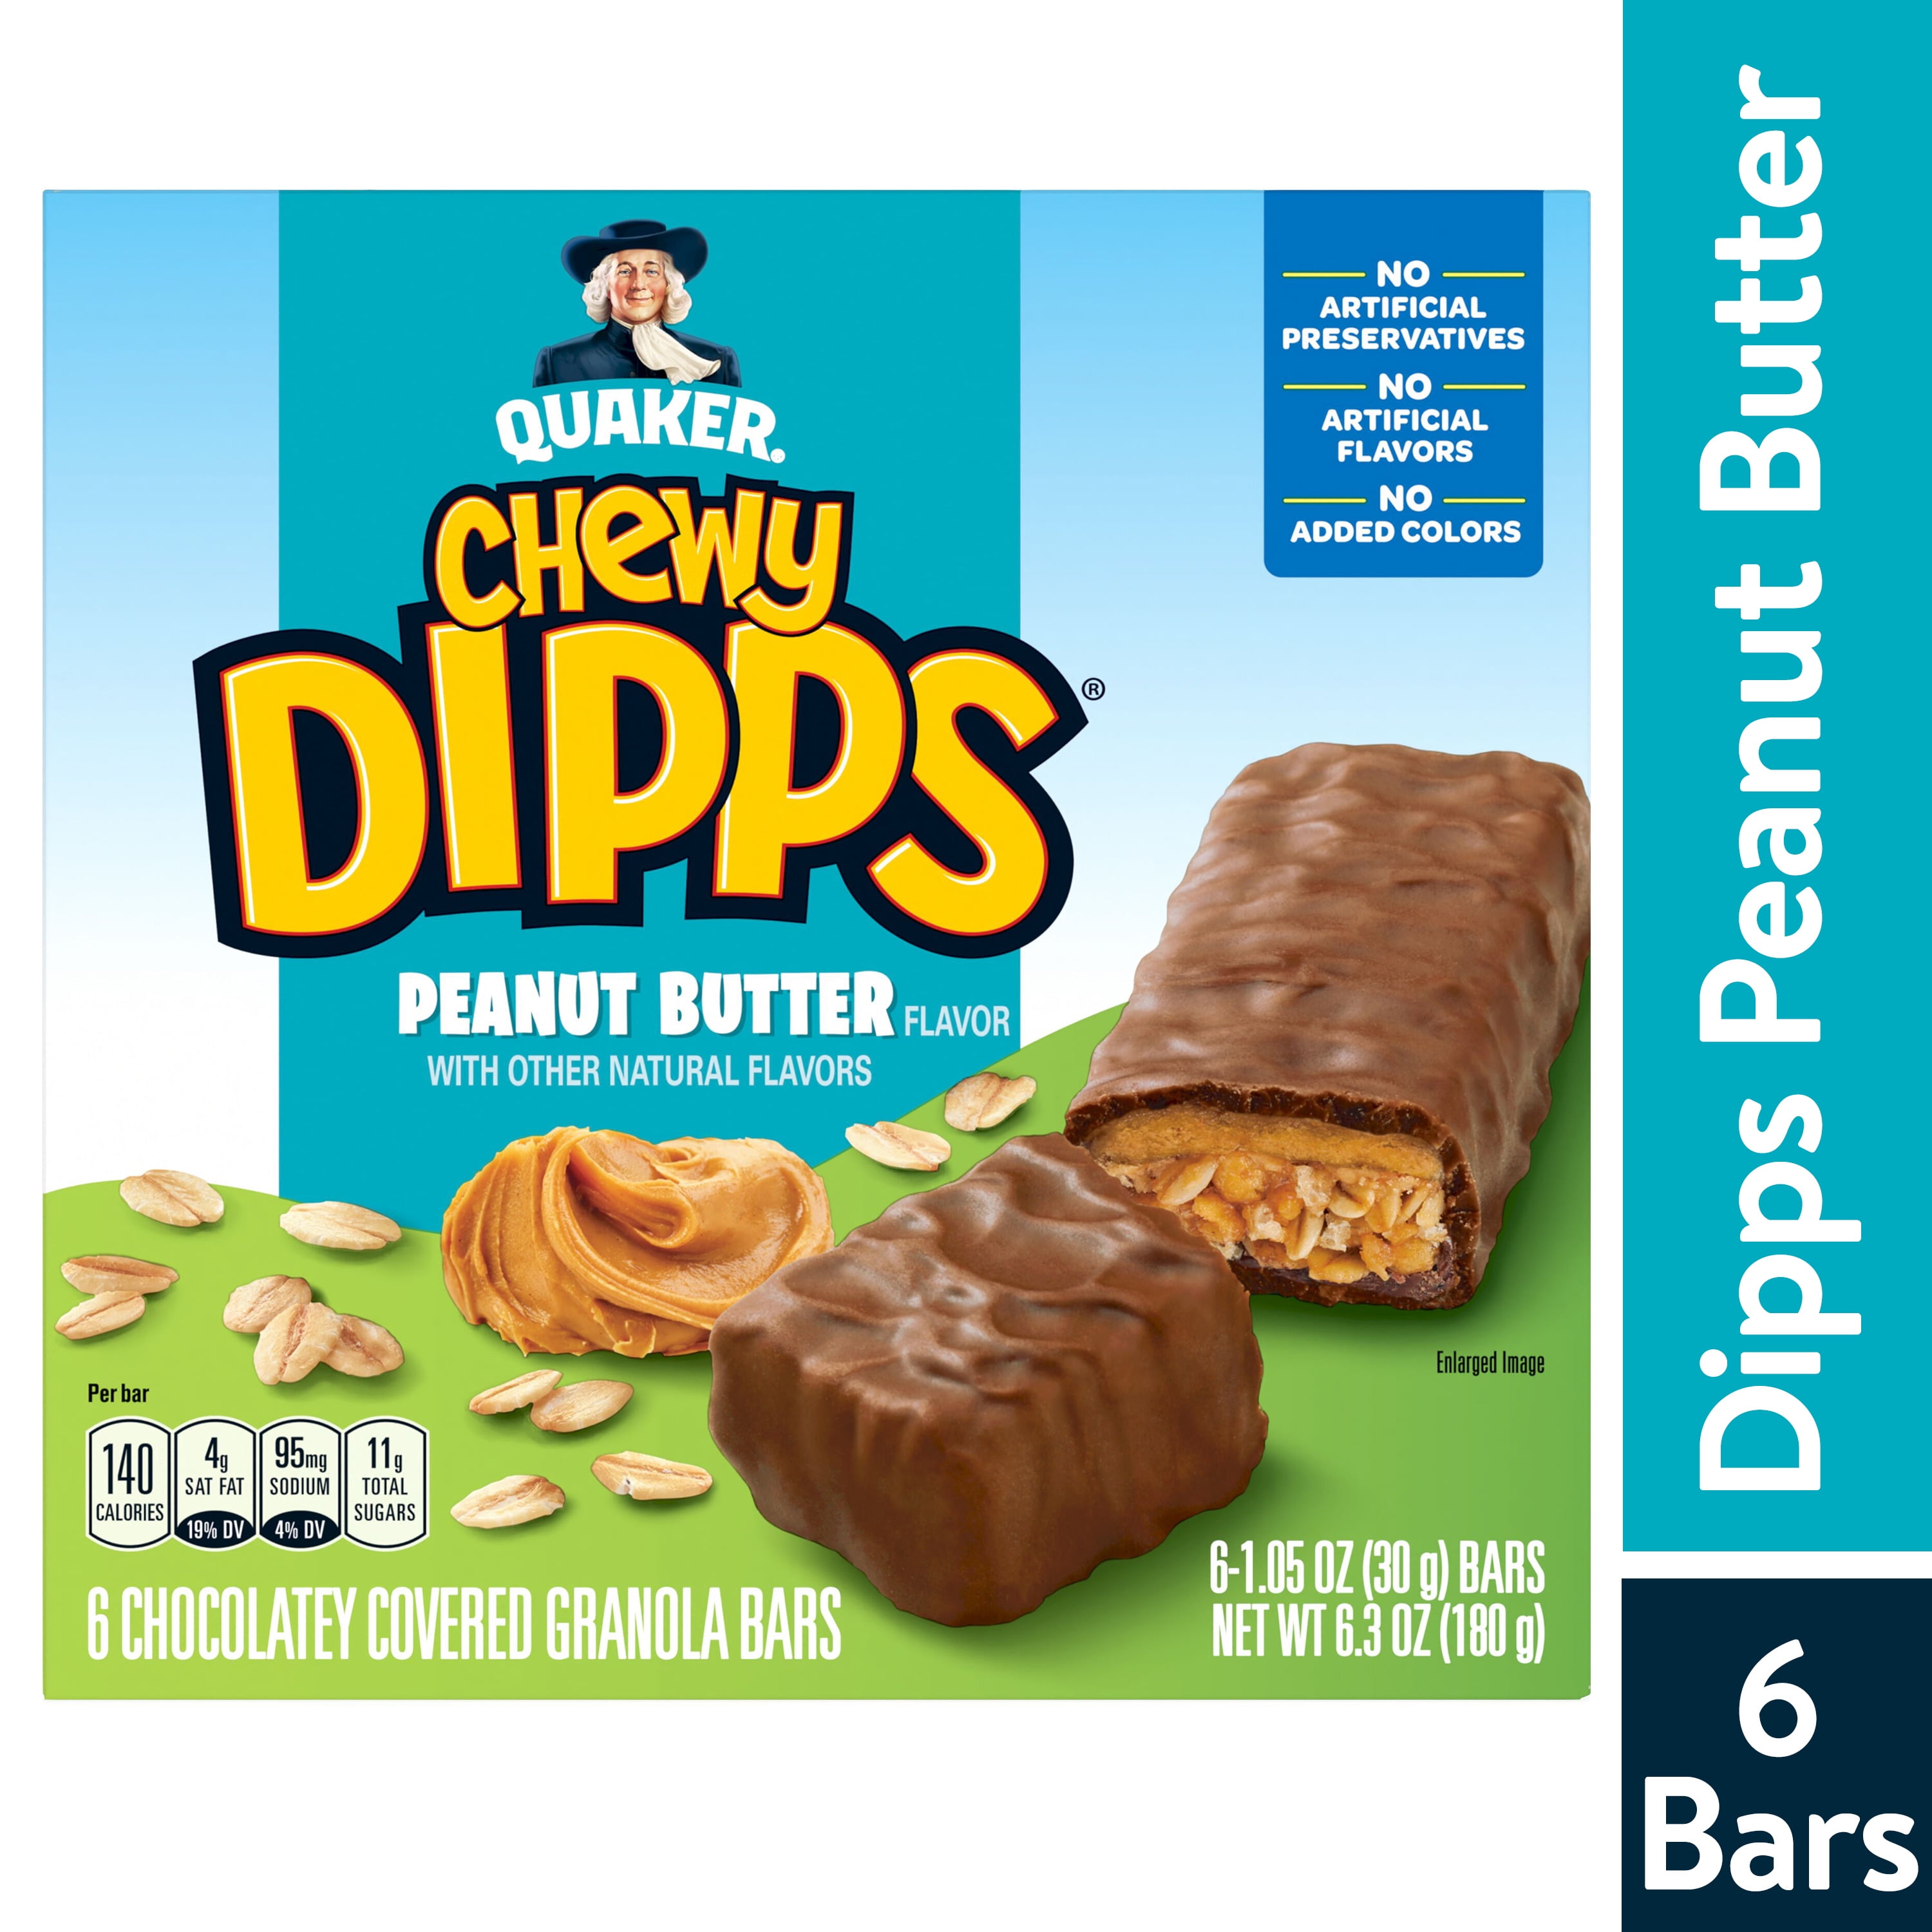 Quaker Peanut Butter Chewy Dipps Granola Bars,1.05 oz bars, 6 Count